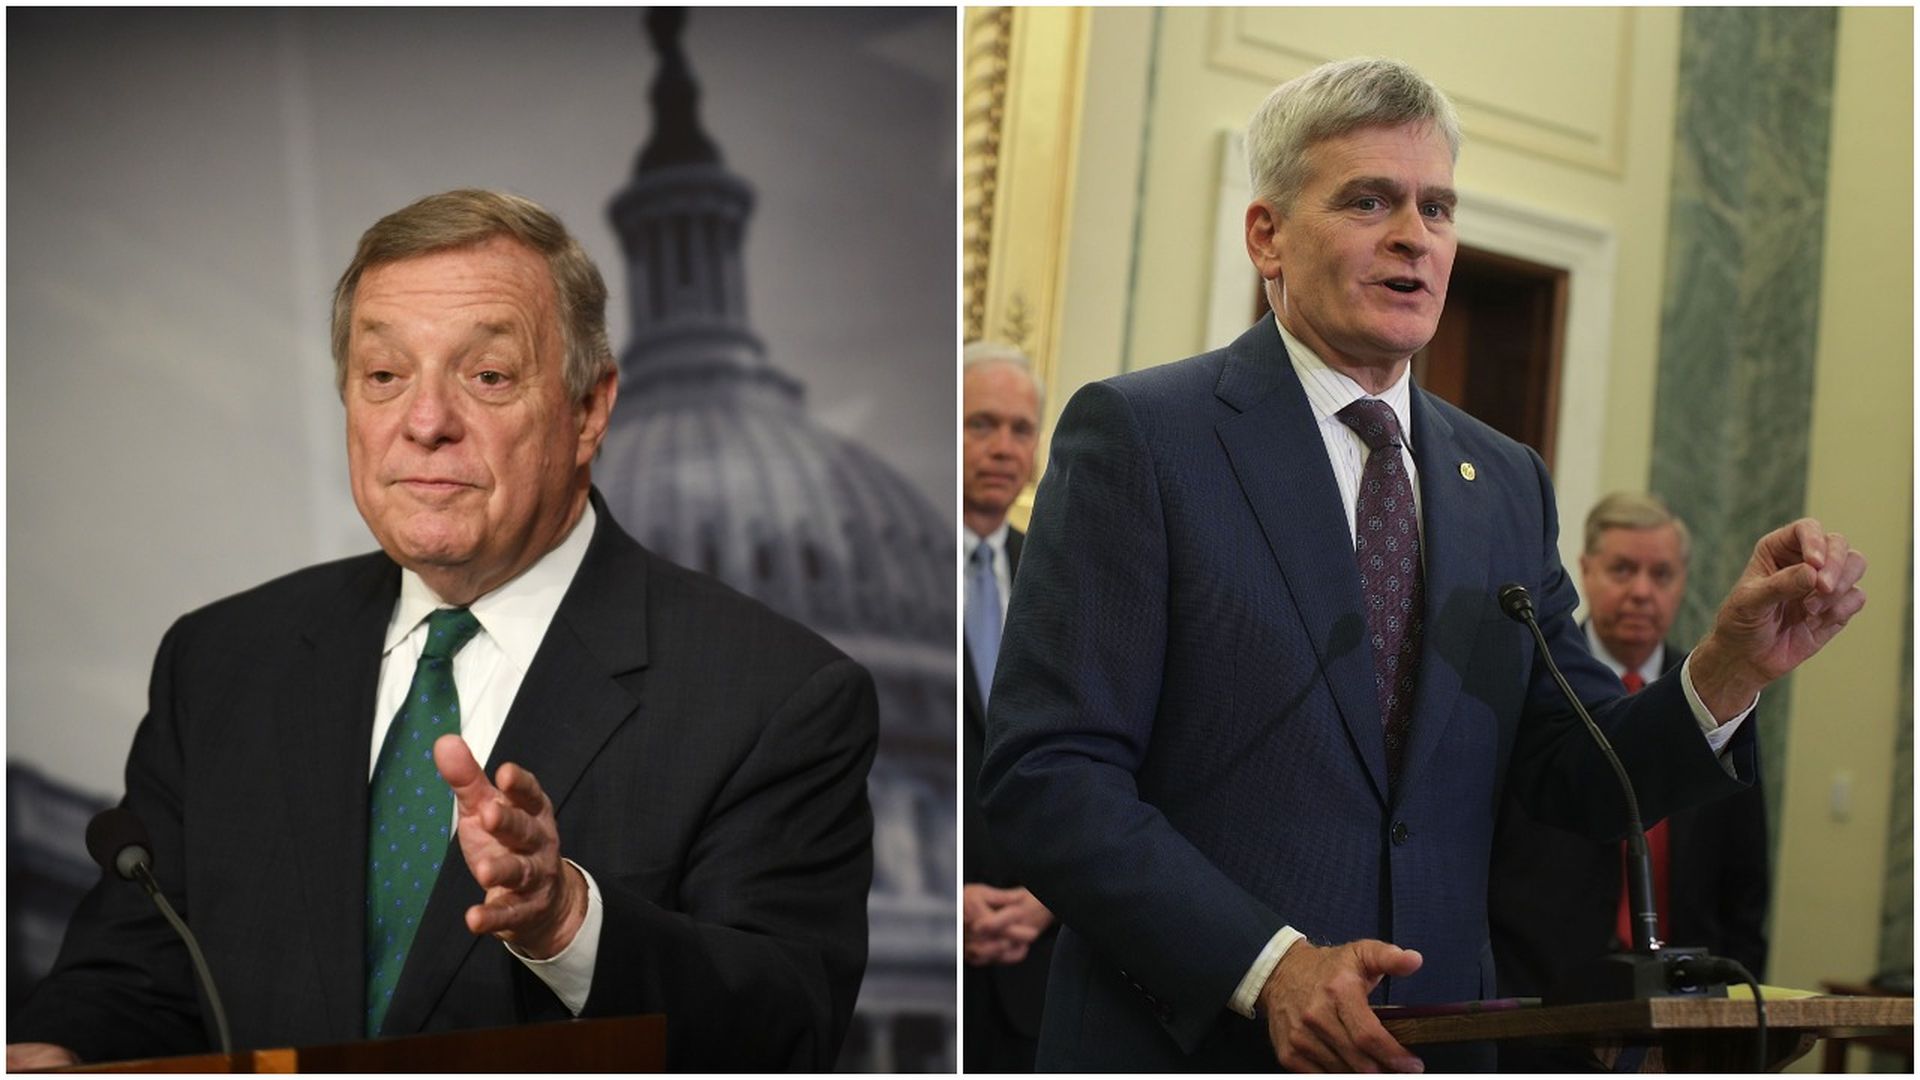 This image is a split scree between Sen. Cassidy and Sen. Durbin, who are both standing in suits and talking with one hand raised. 